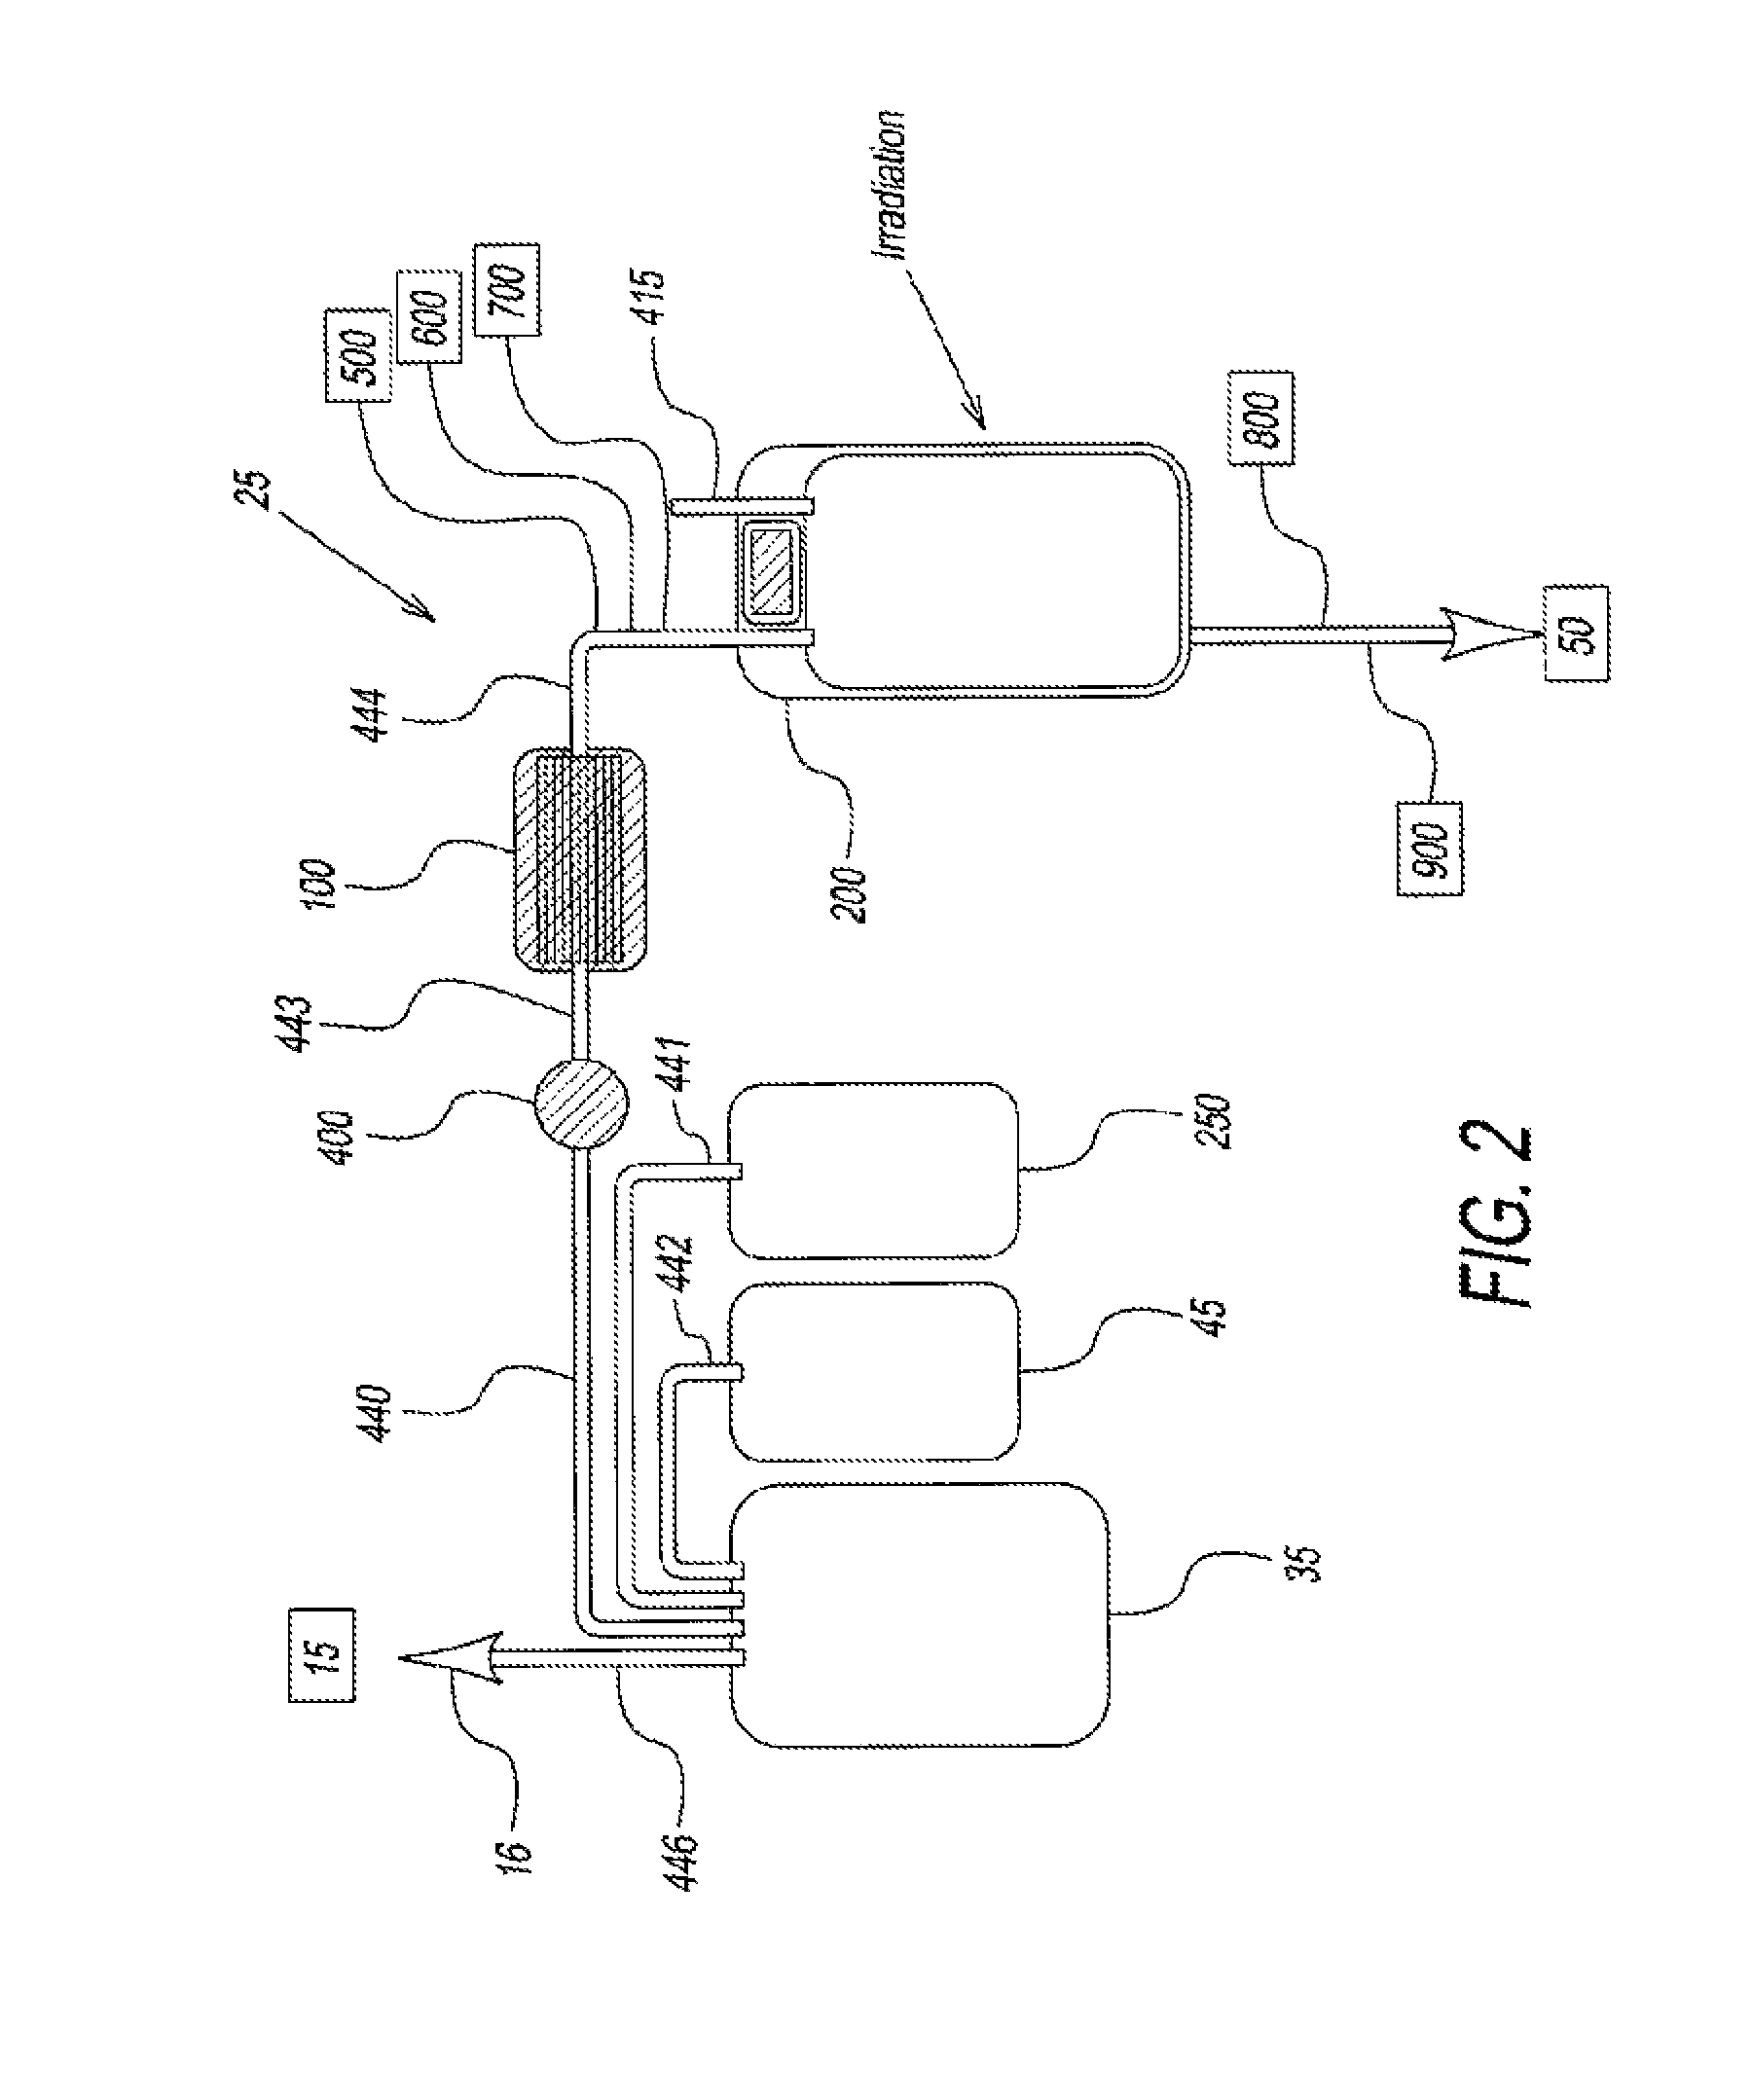 System for extended storage of red blood cells and methods of use